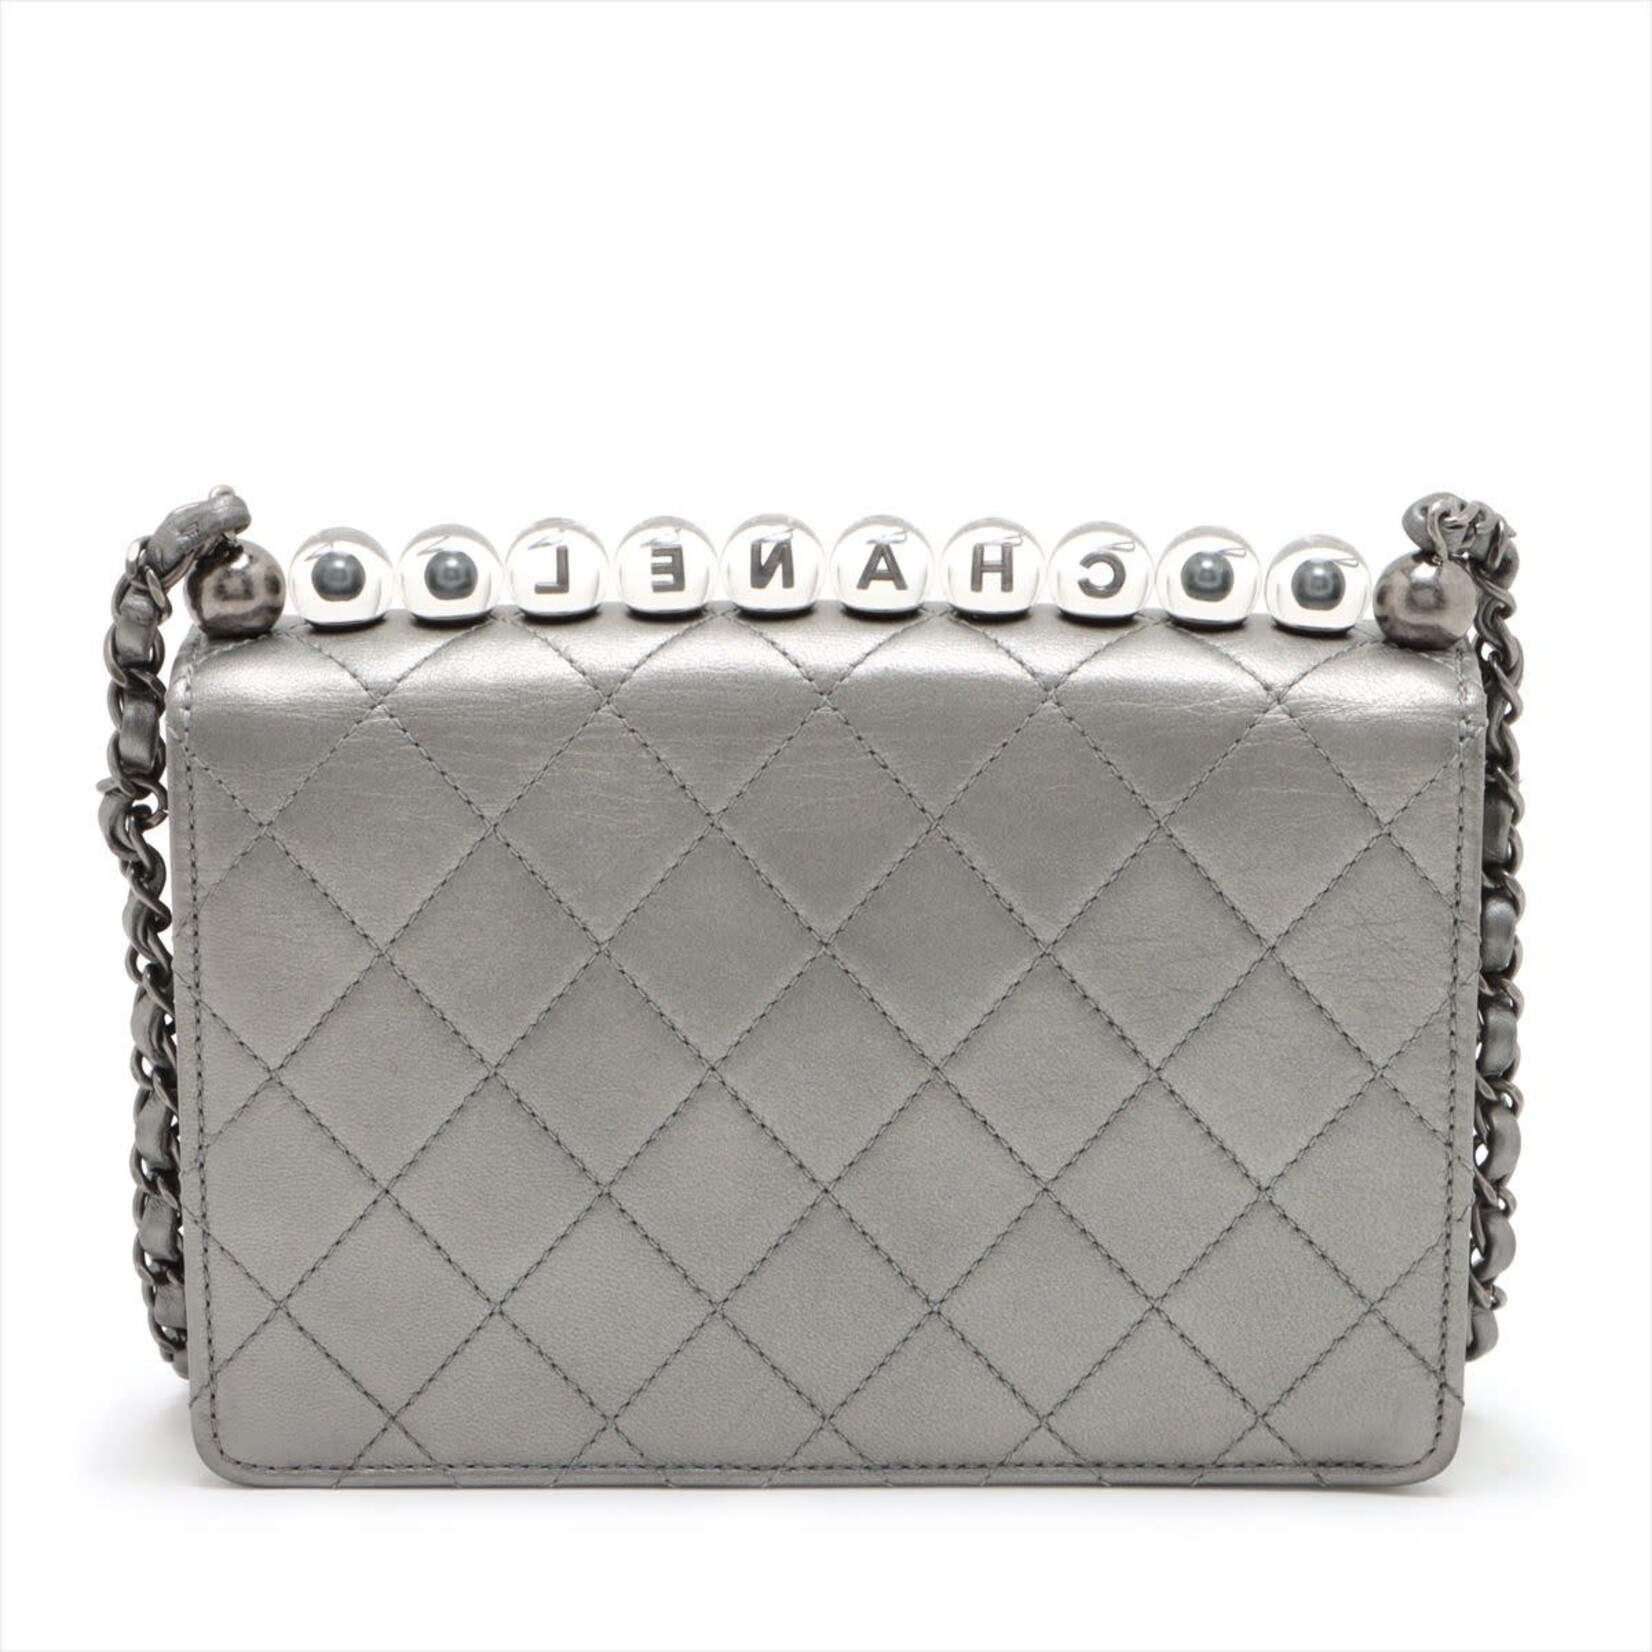 Authentic Chanel Quilted Chain Shoulder Bag